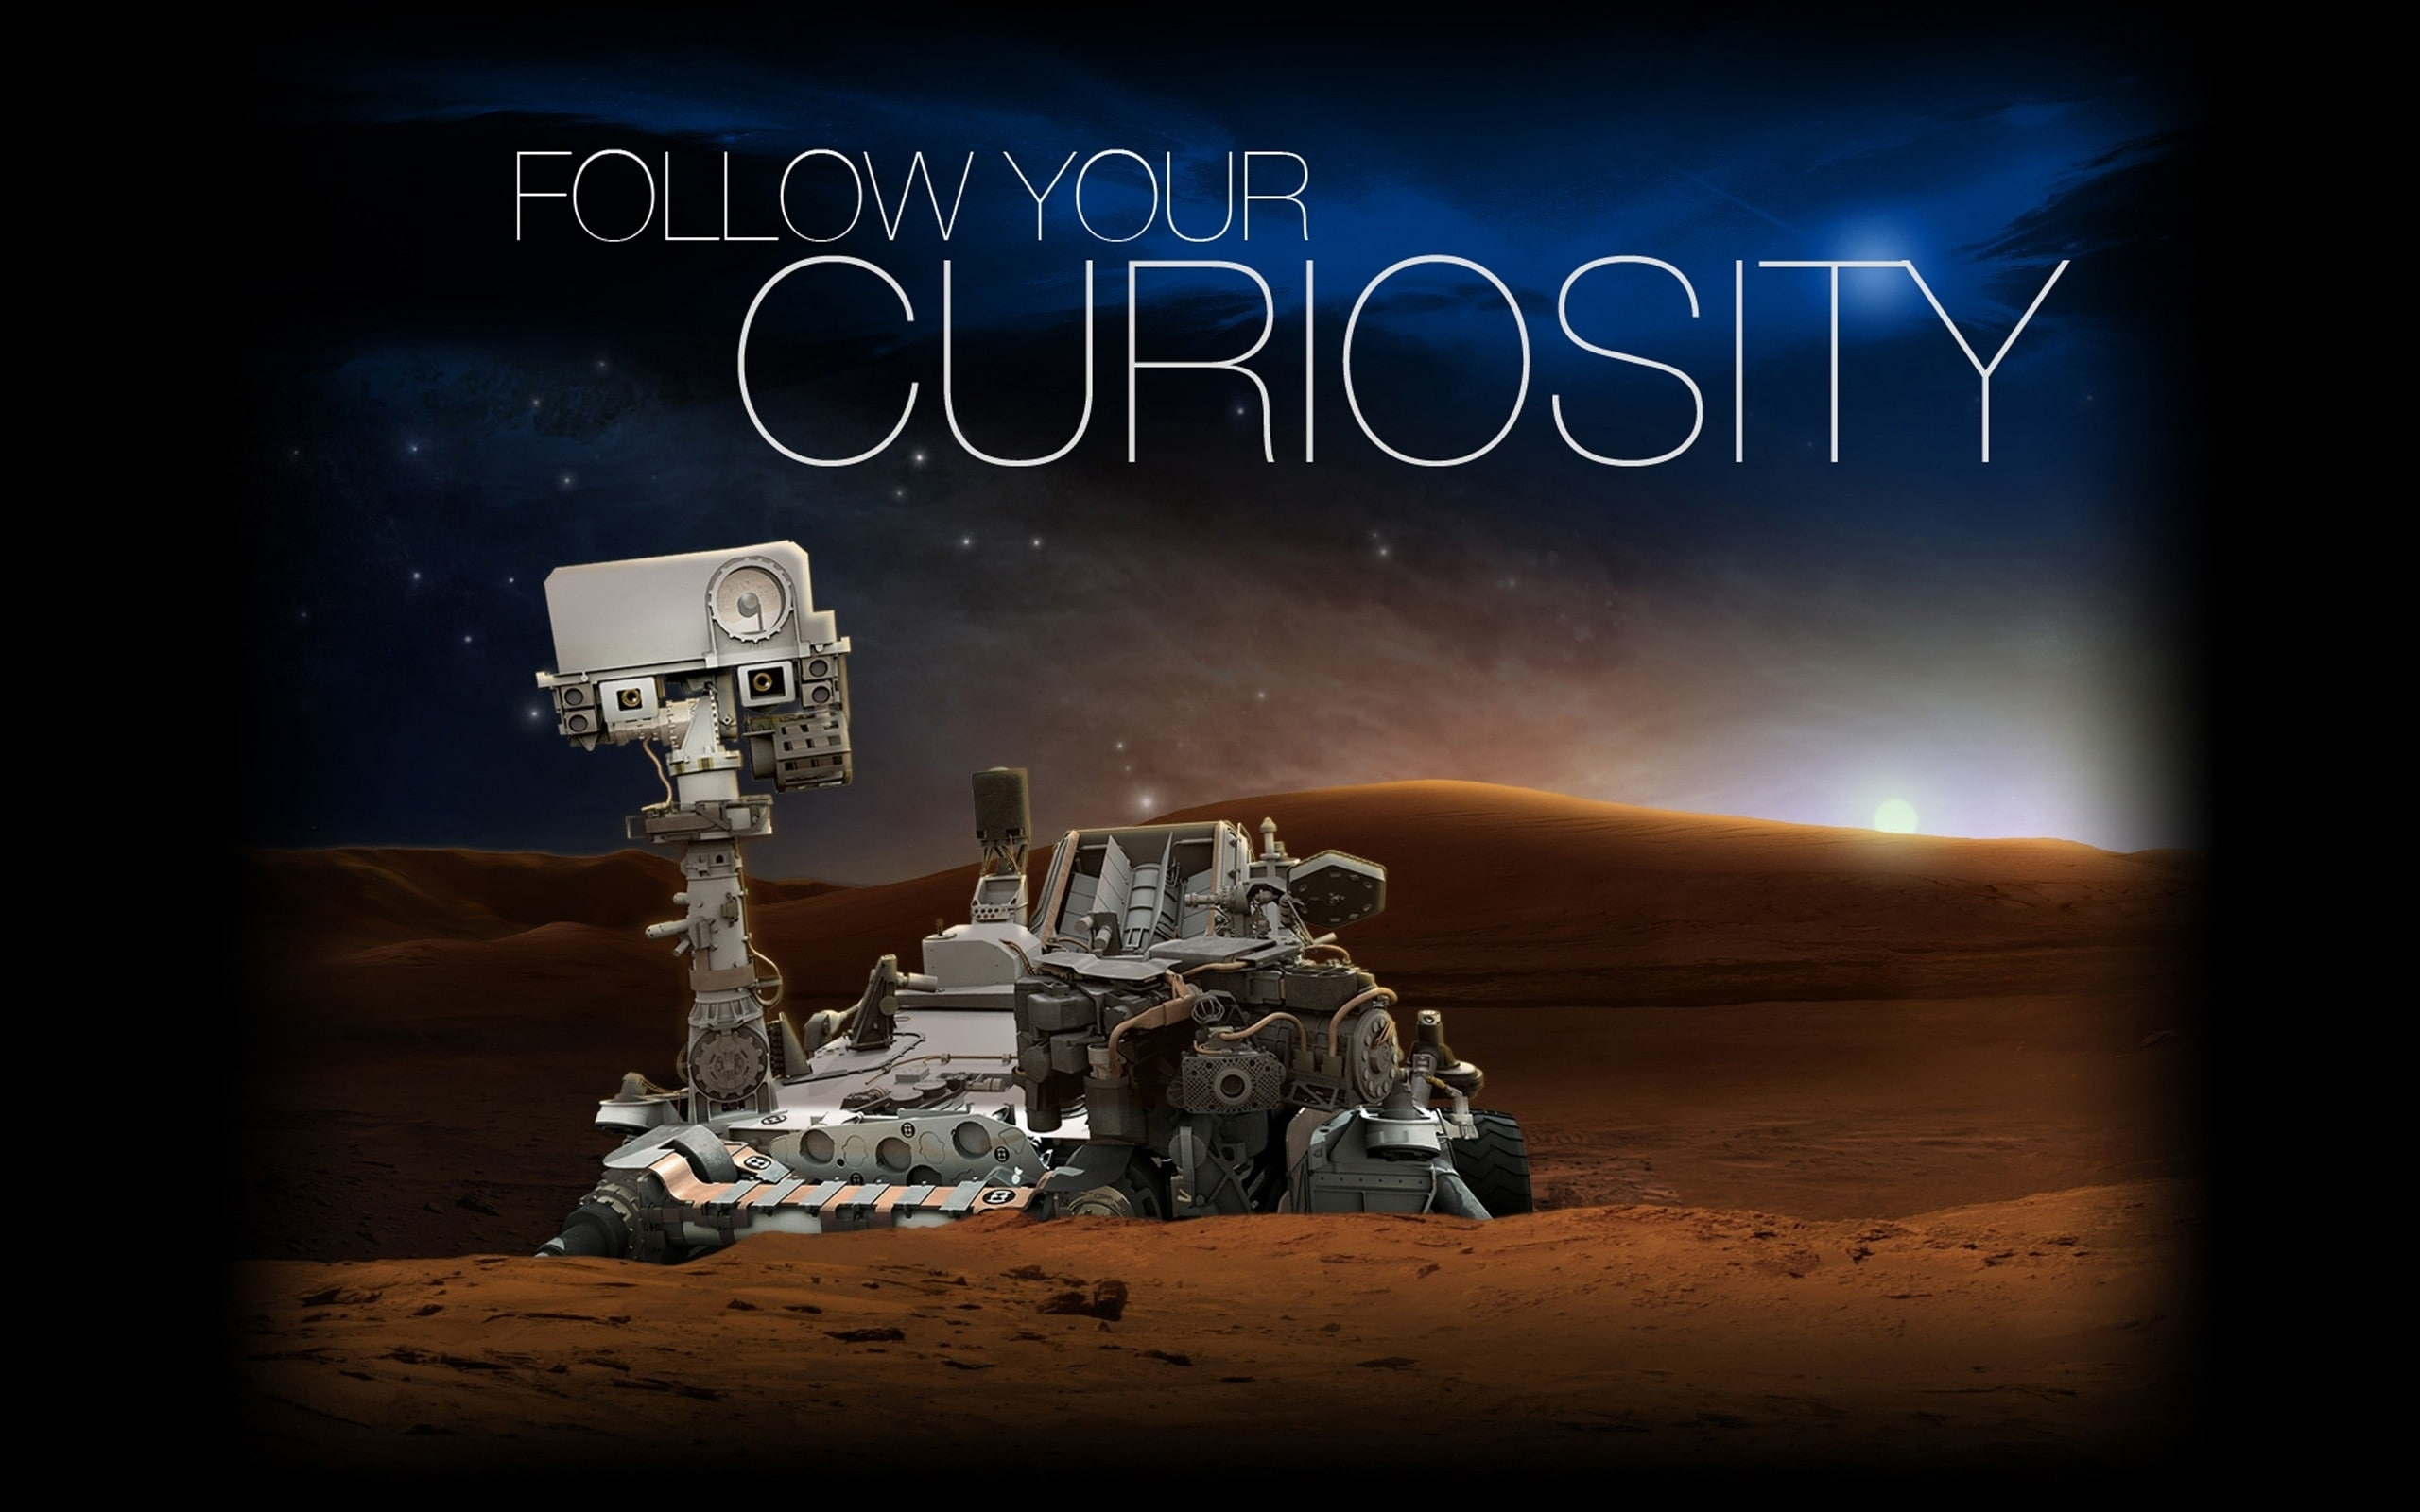 Mars, Curiosity, NASA, Rover, science, space, no people, communication